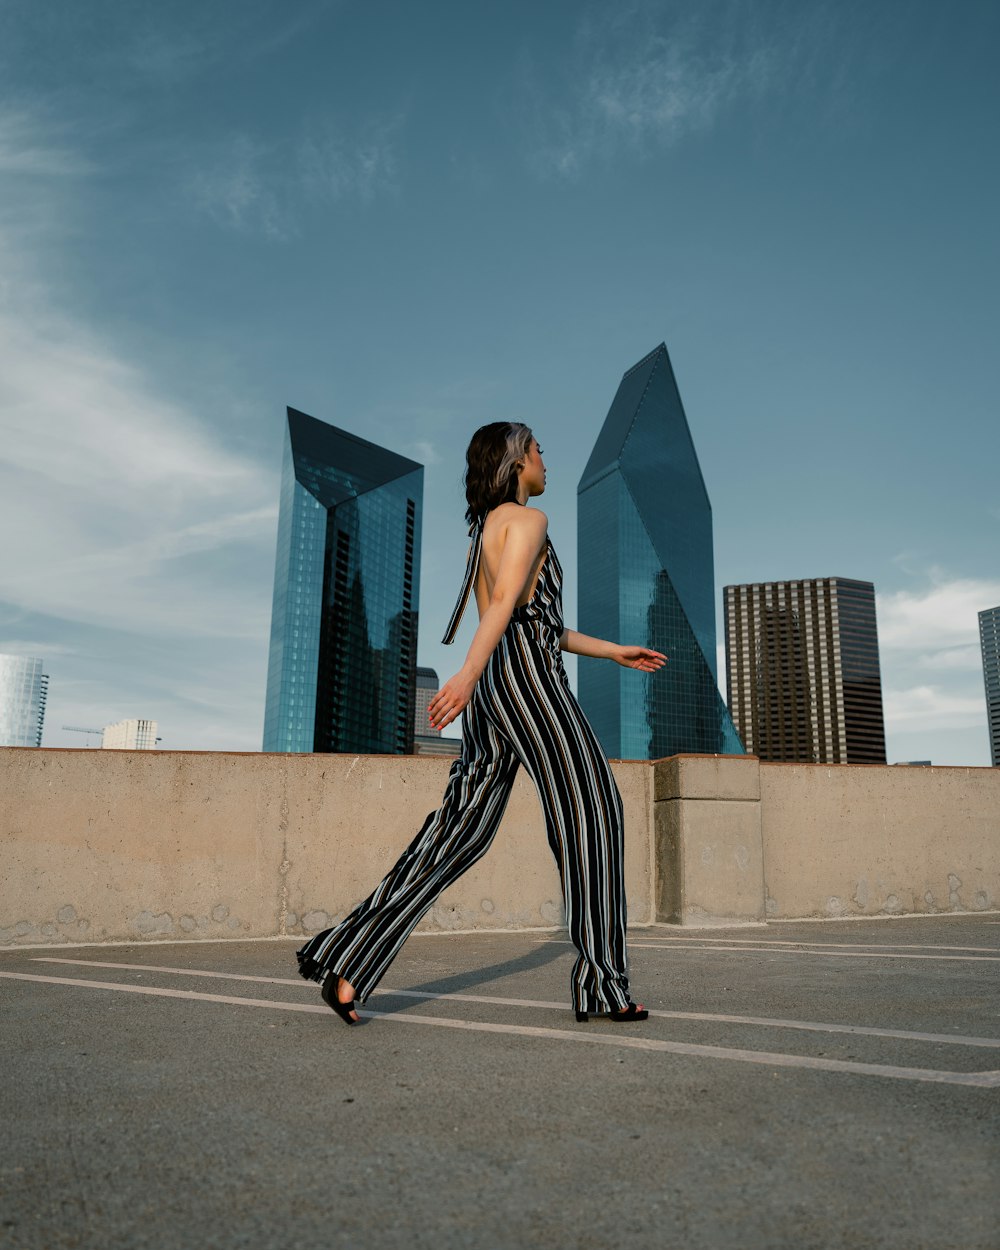 a woman walking across a parking lot next to tall buildings